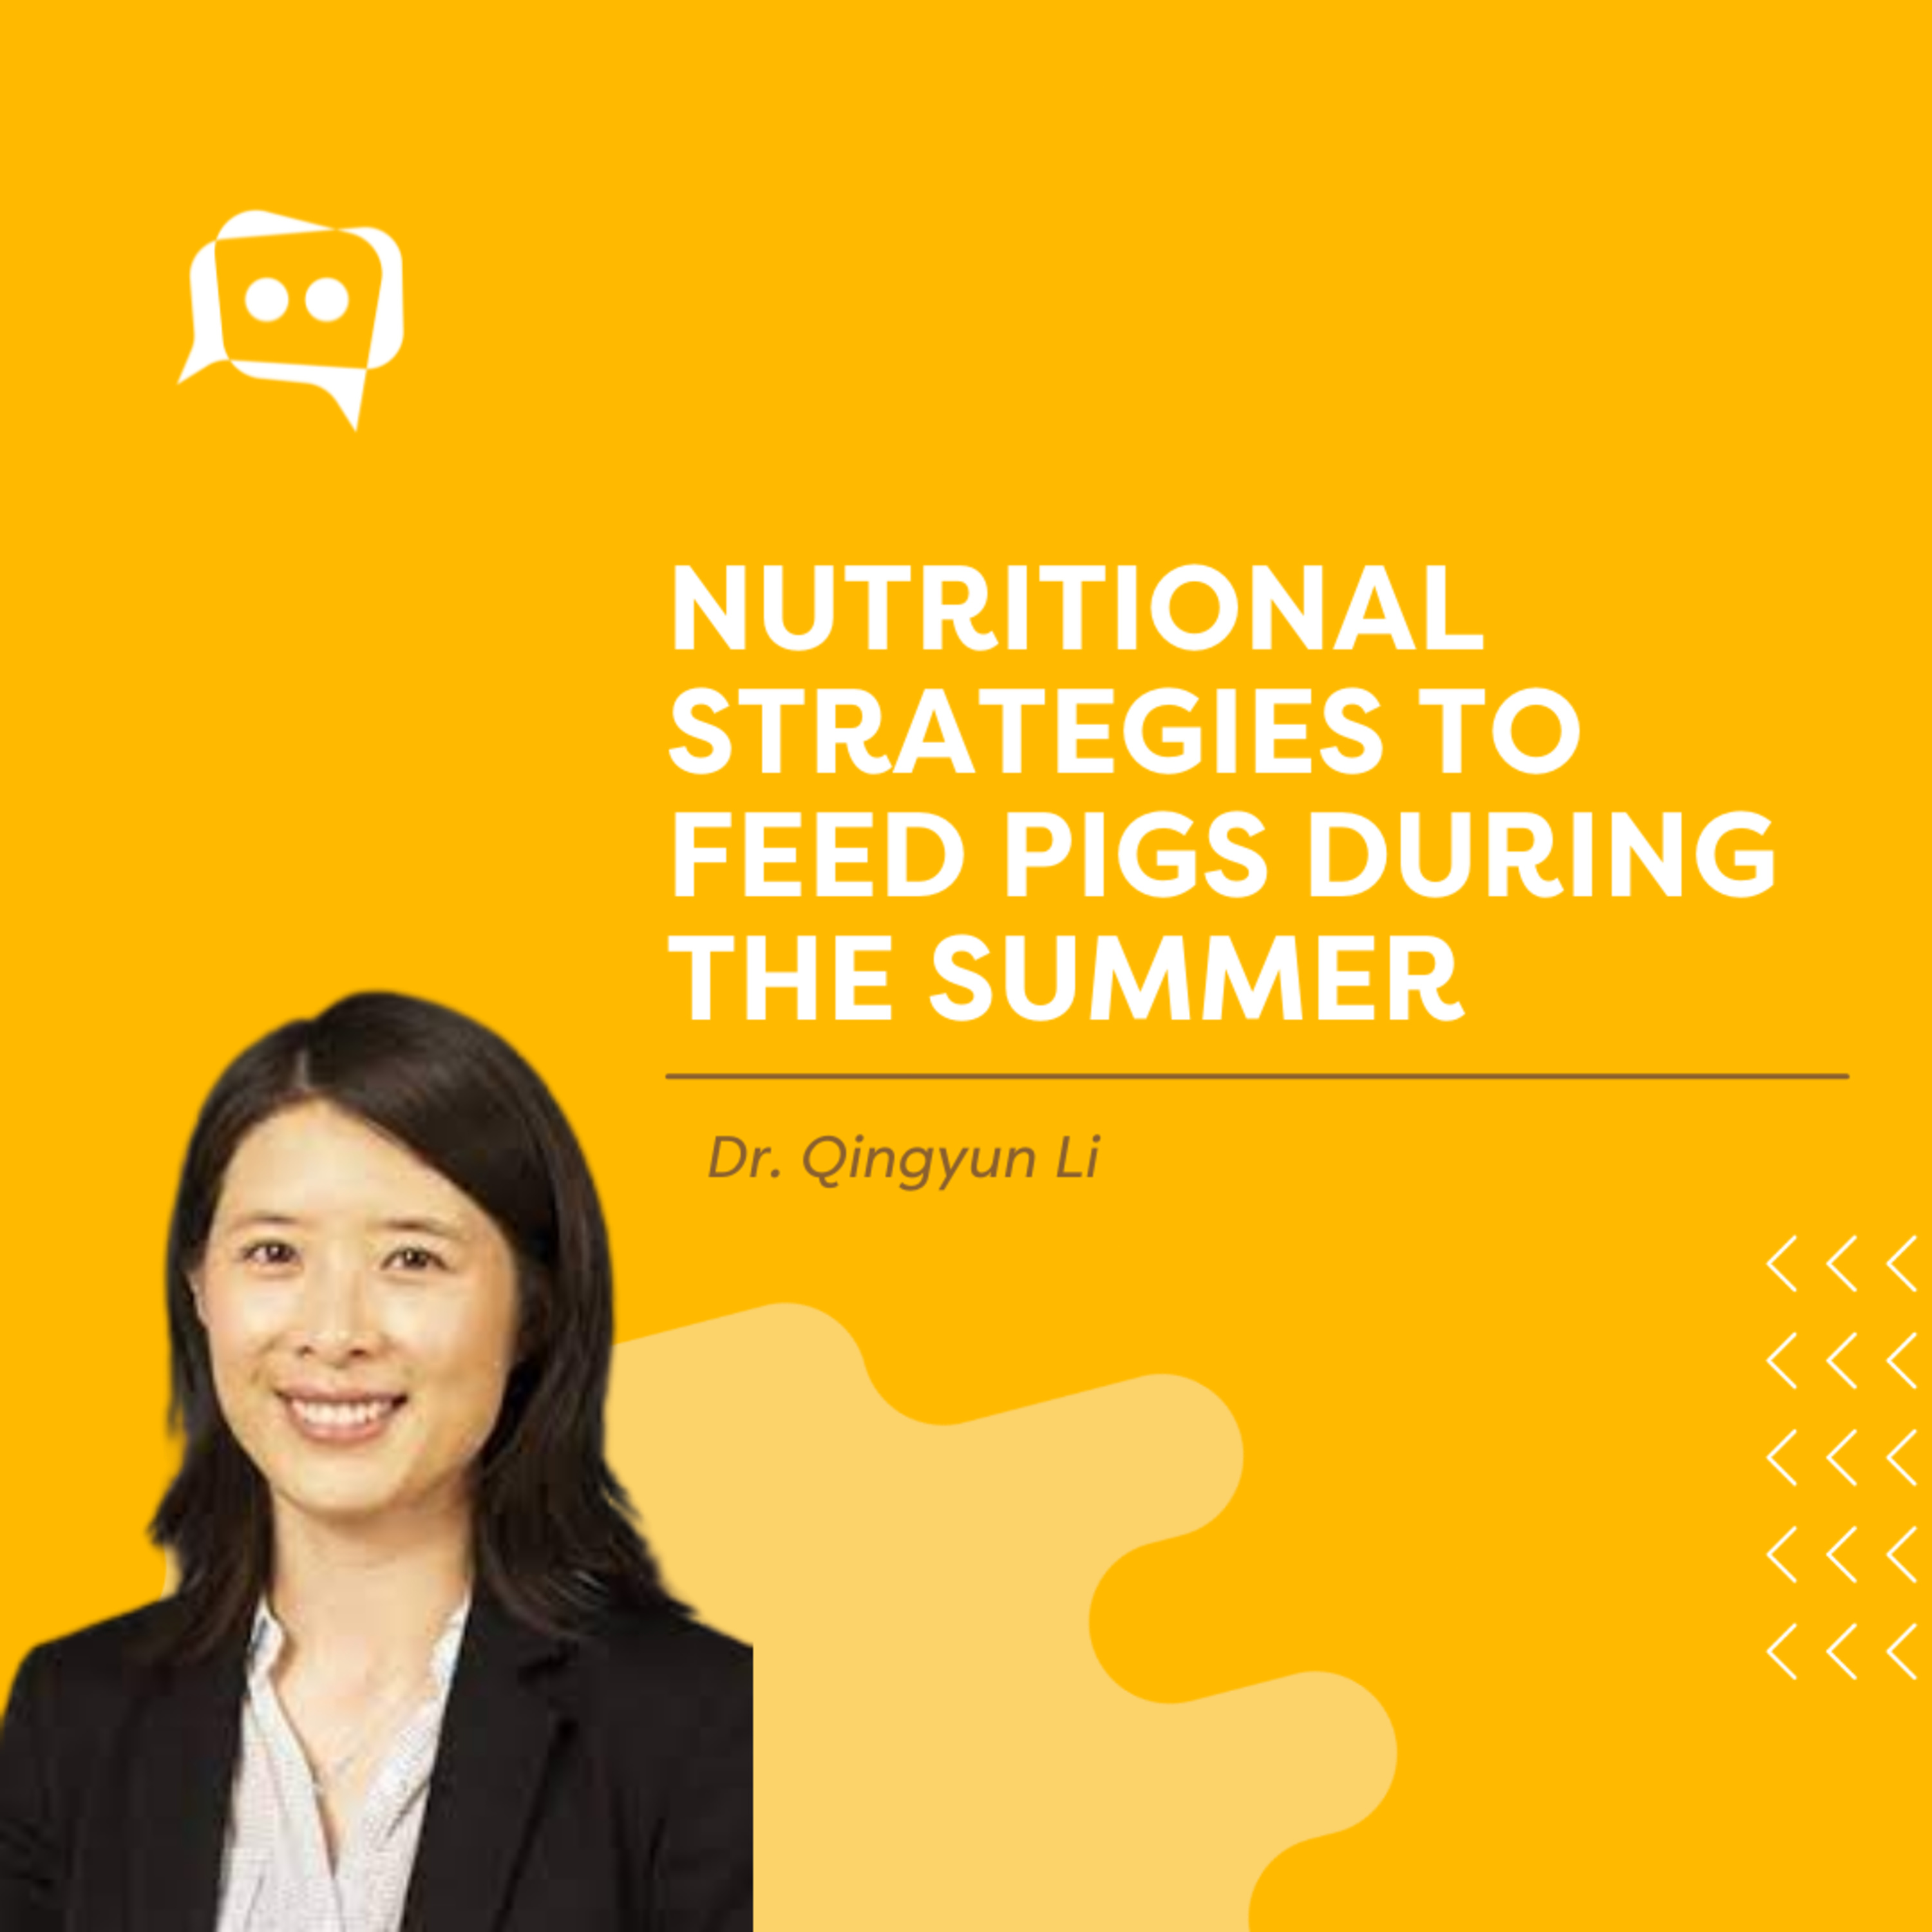 #SHORTS: Nutritional strategies to feed pigs during the summer, with Dr. Qingyun Li